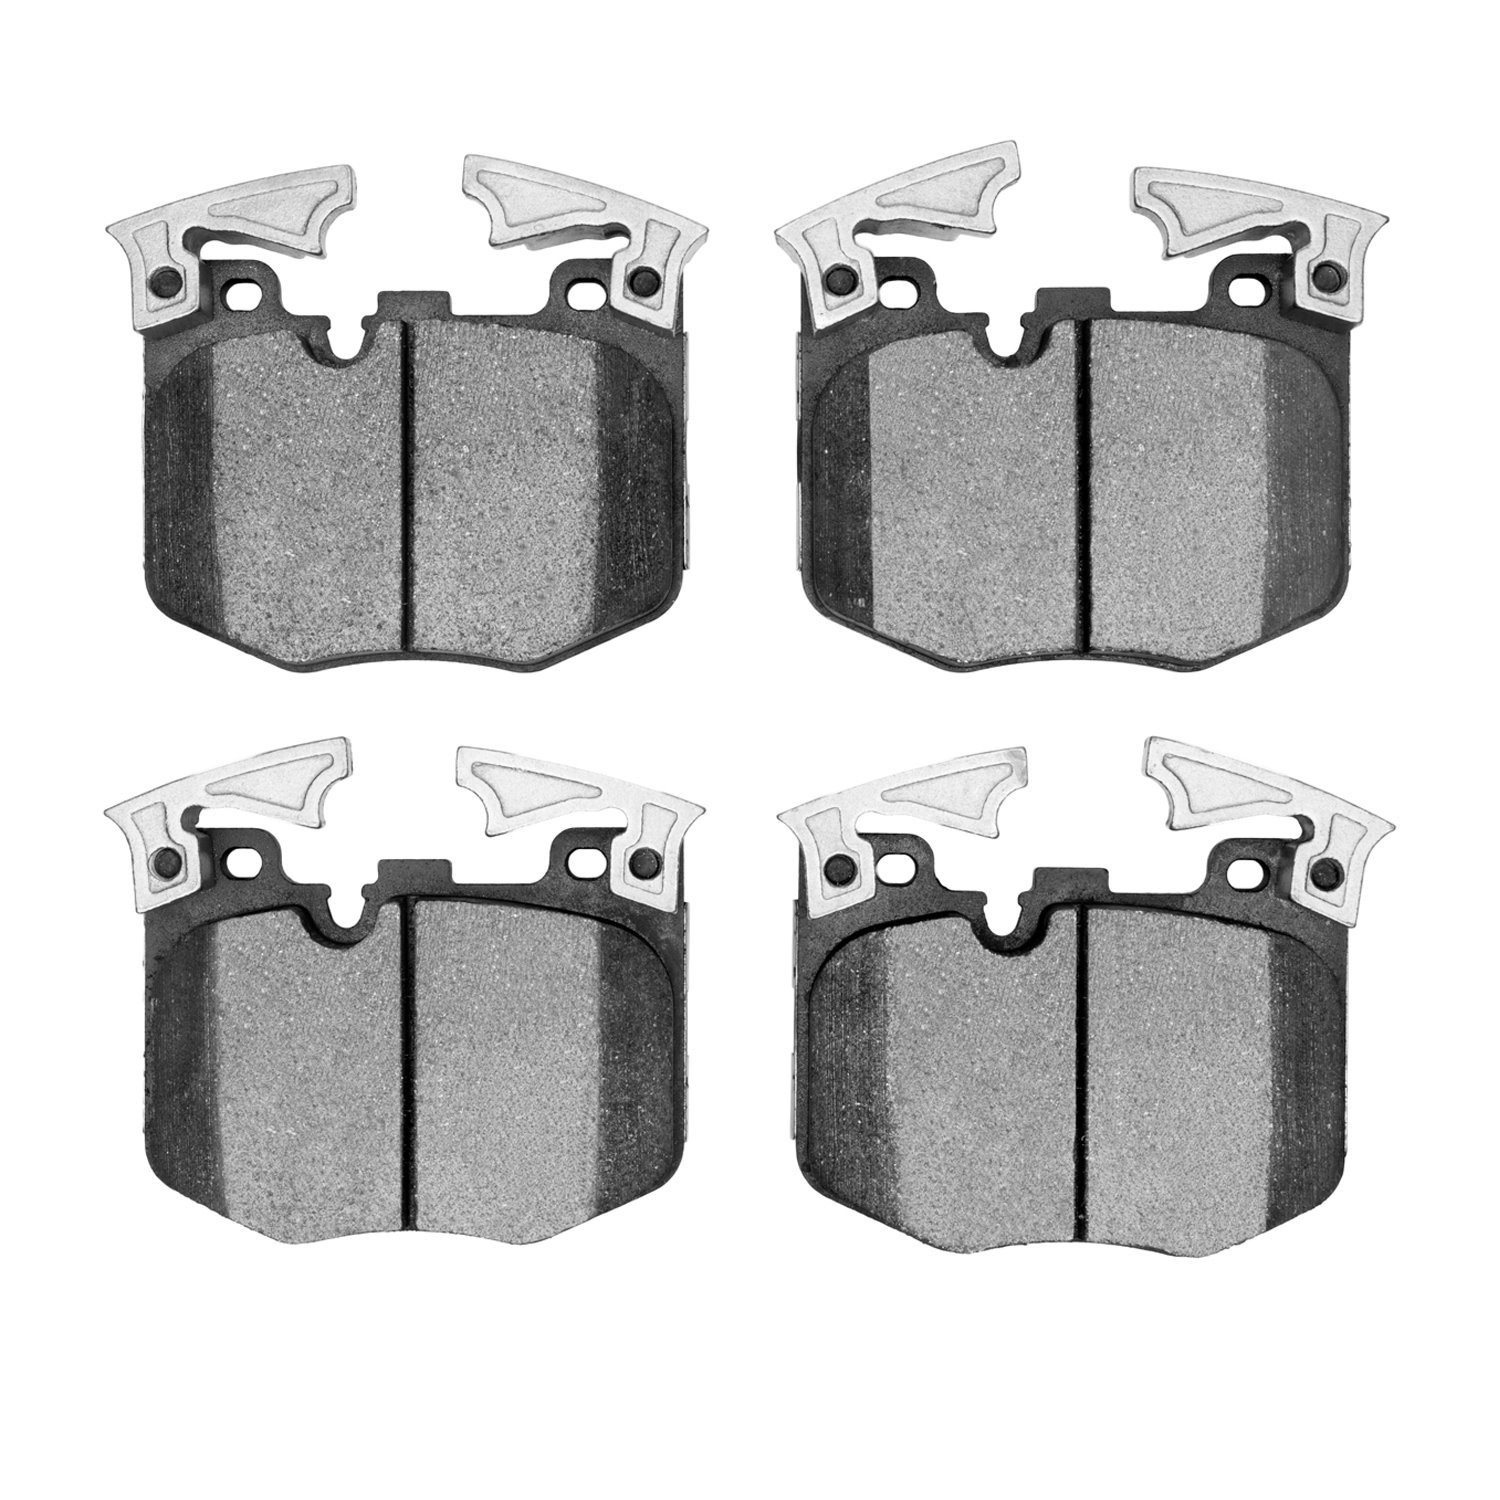 1310-1867-00 3000-Series Ceramic Brake Pads, Fits Select Multiple Makes/Models, Position: Front